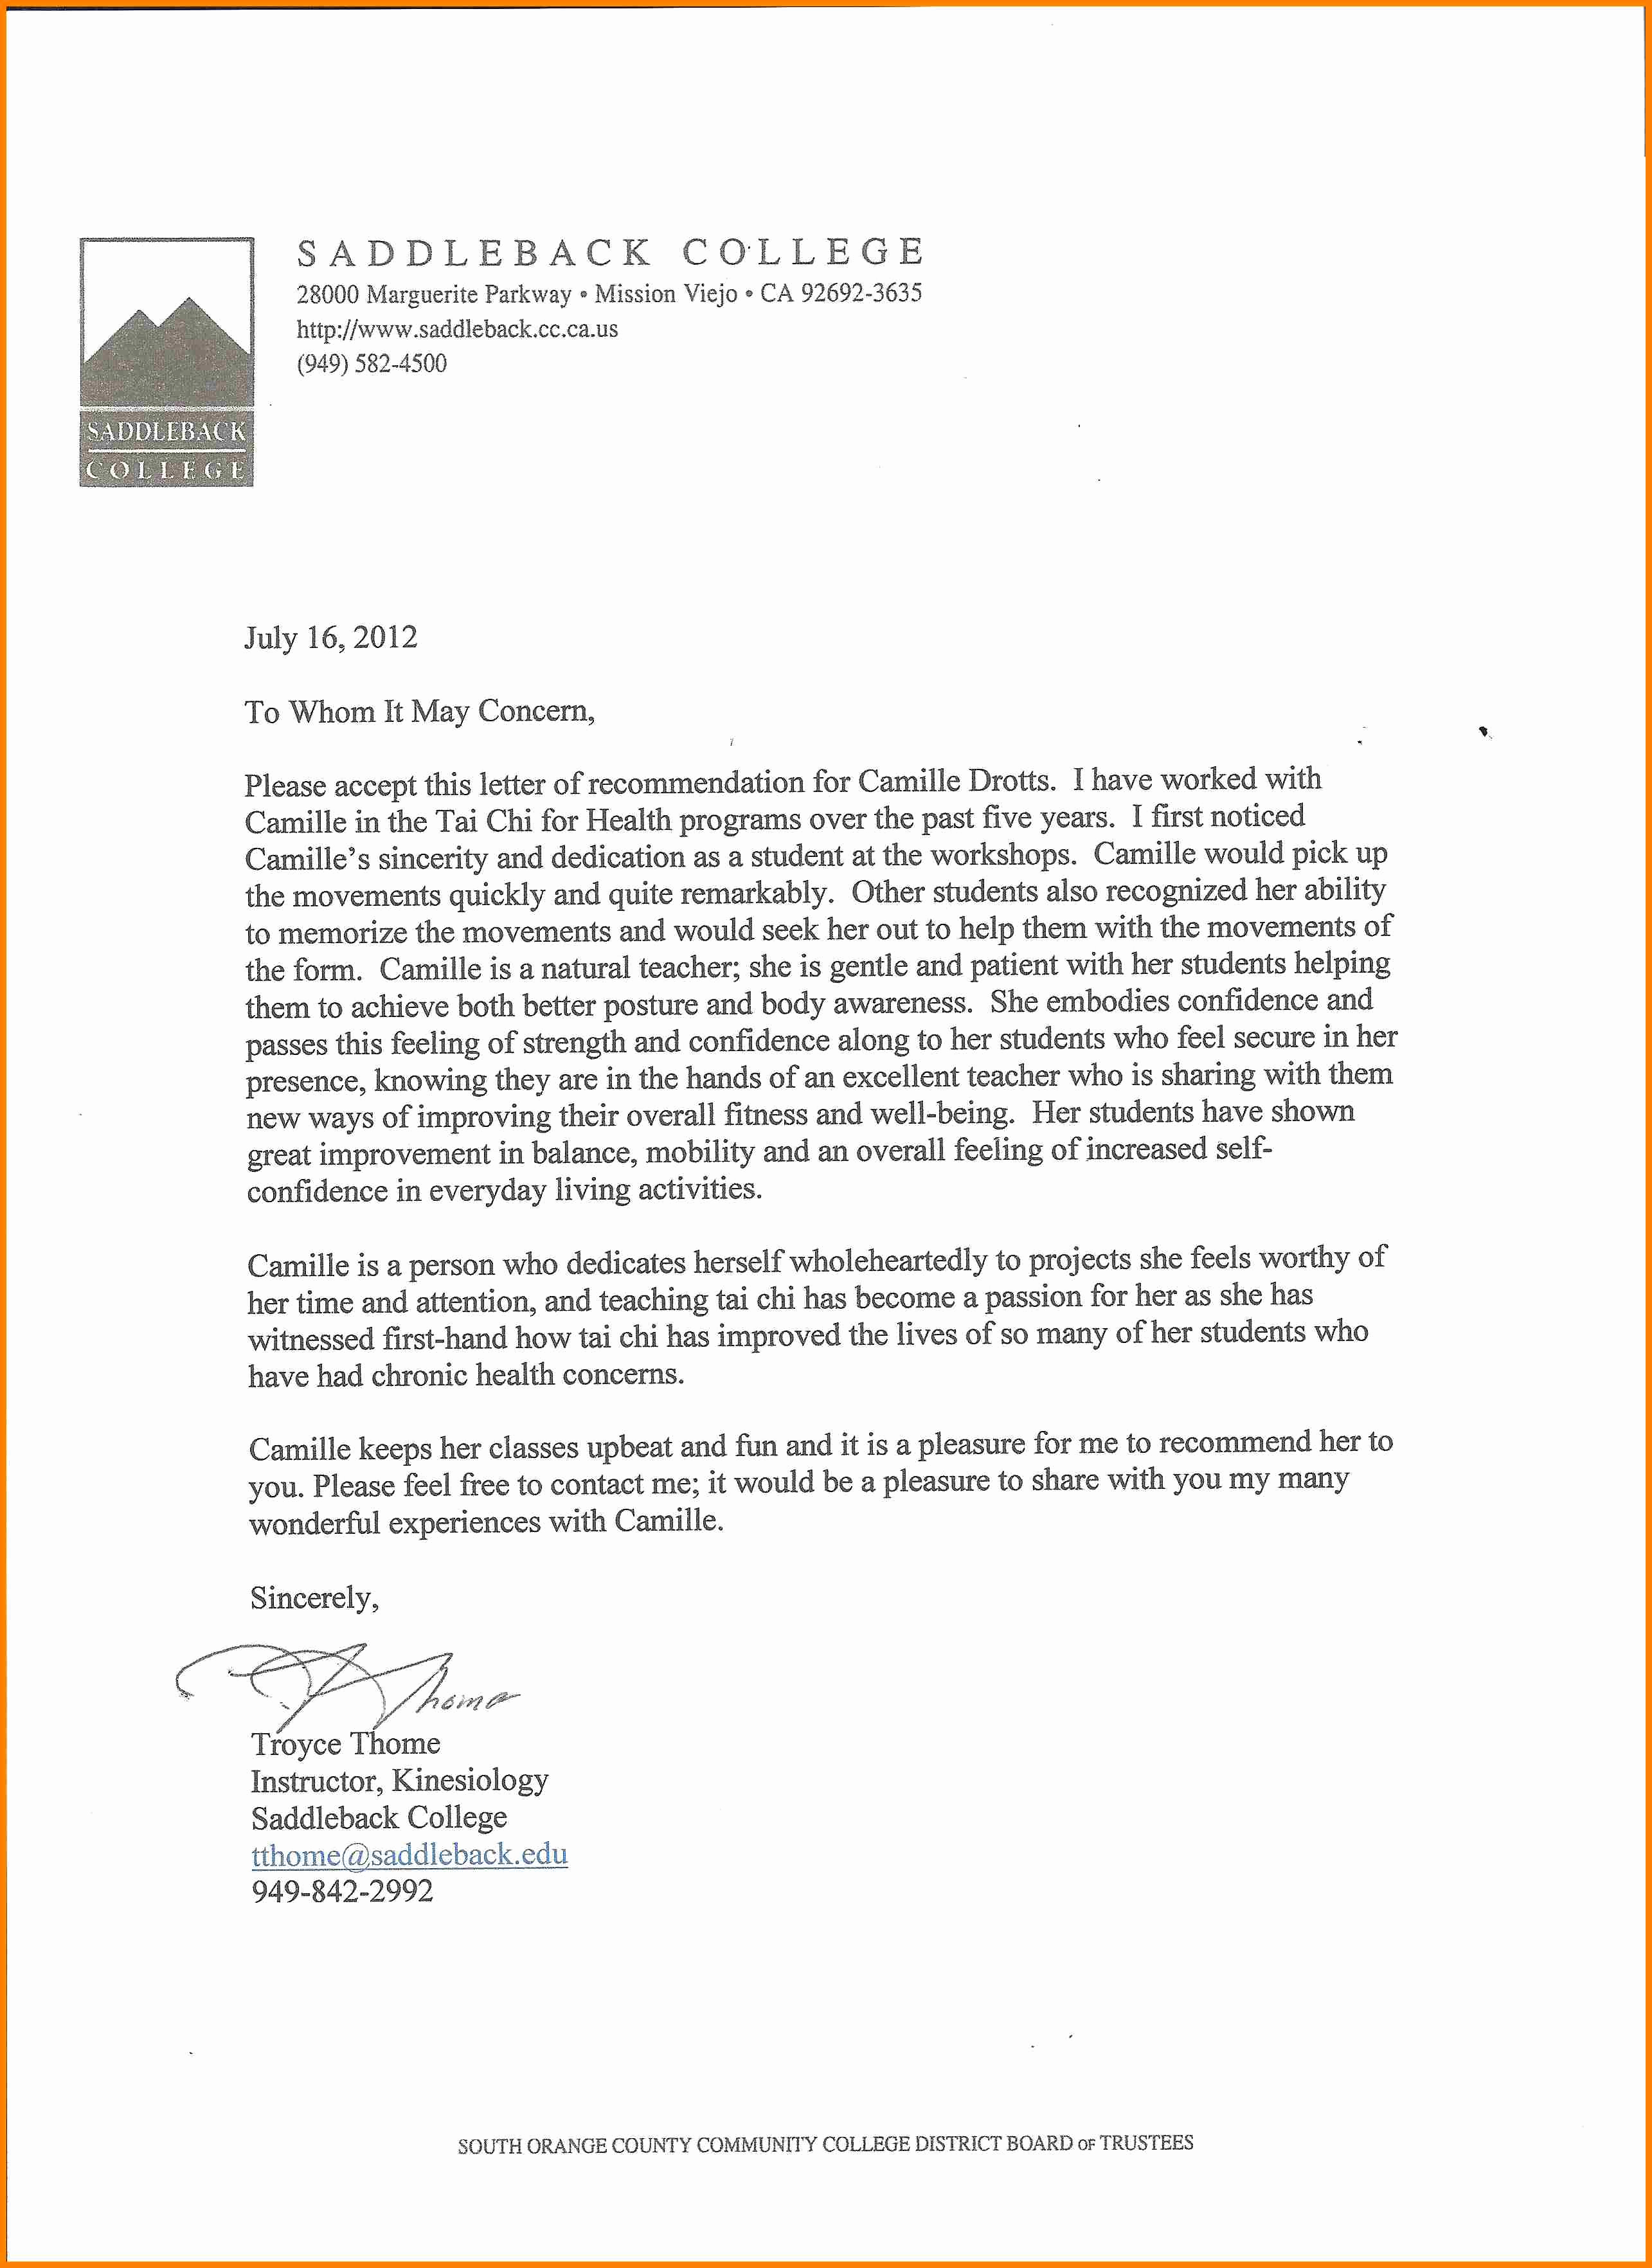 College Recommendation Letter Sample Awesome 7 Letter Of Re Mendation From College Professor